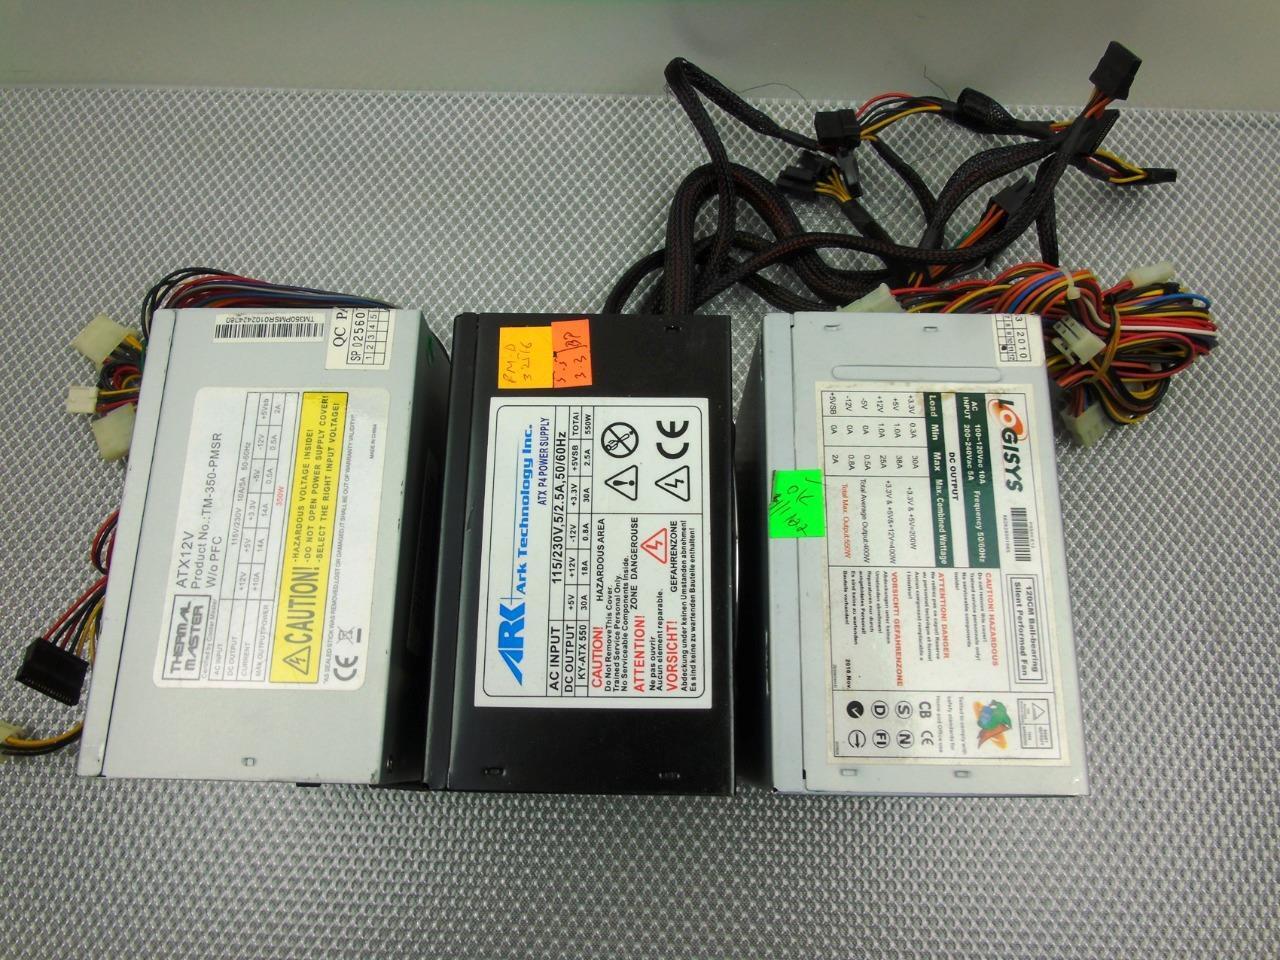 Lot of 3 - Logisys, ARK, Thermal Master 550w 550w 350w  ATX  PC Power Supply